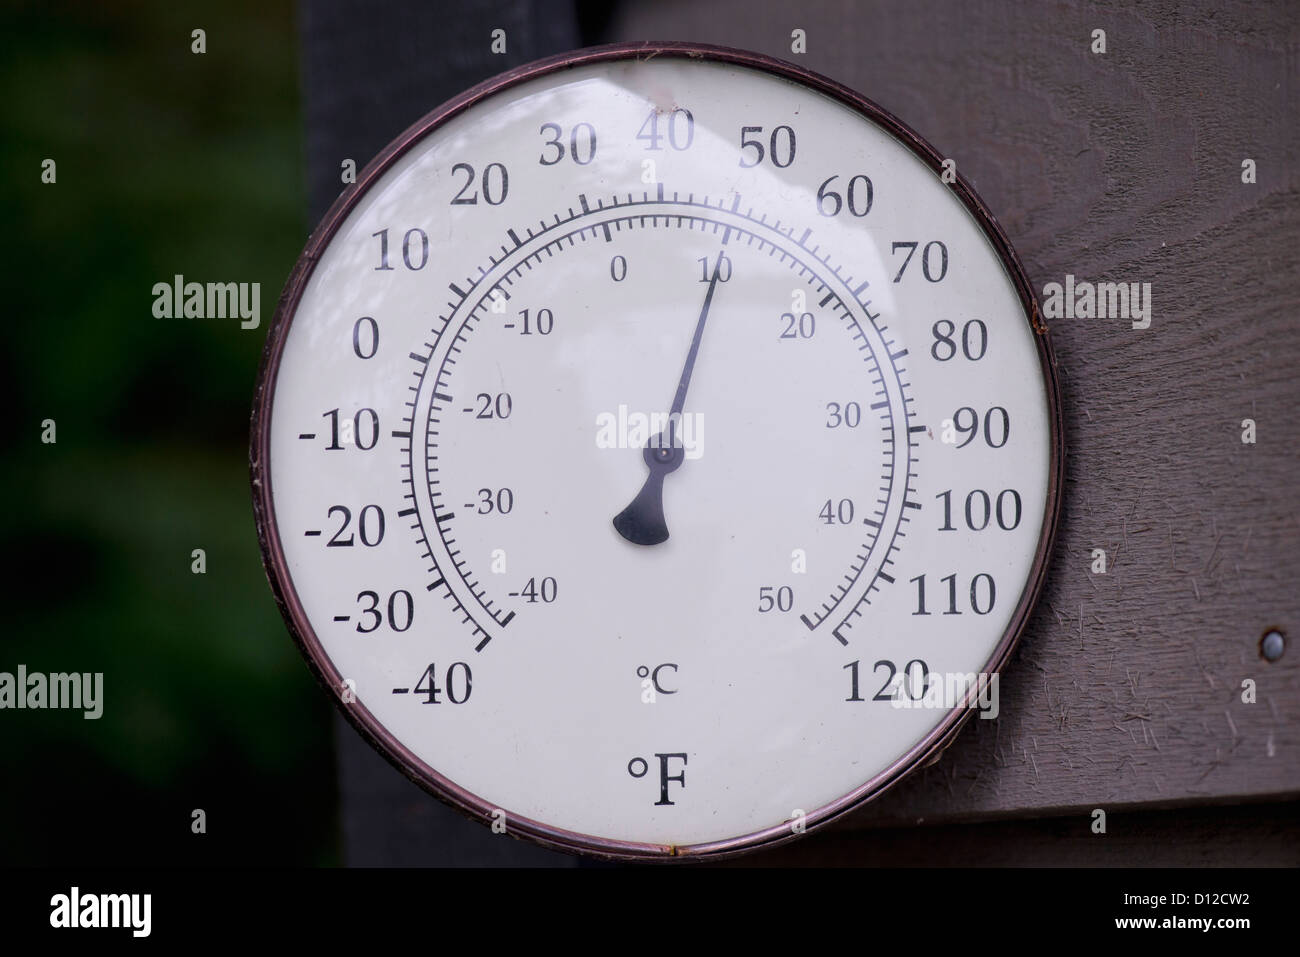 A Thermometer Reading 10 Degrees Celsius; Lake Of The Woods Ontario Canada Stock Photo